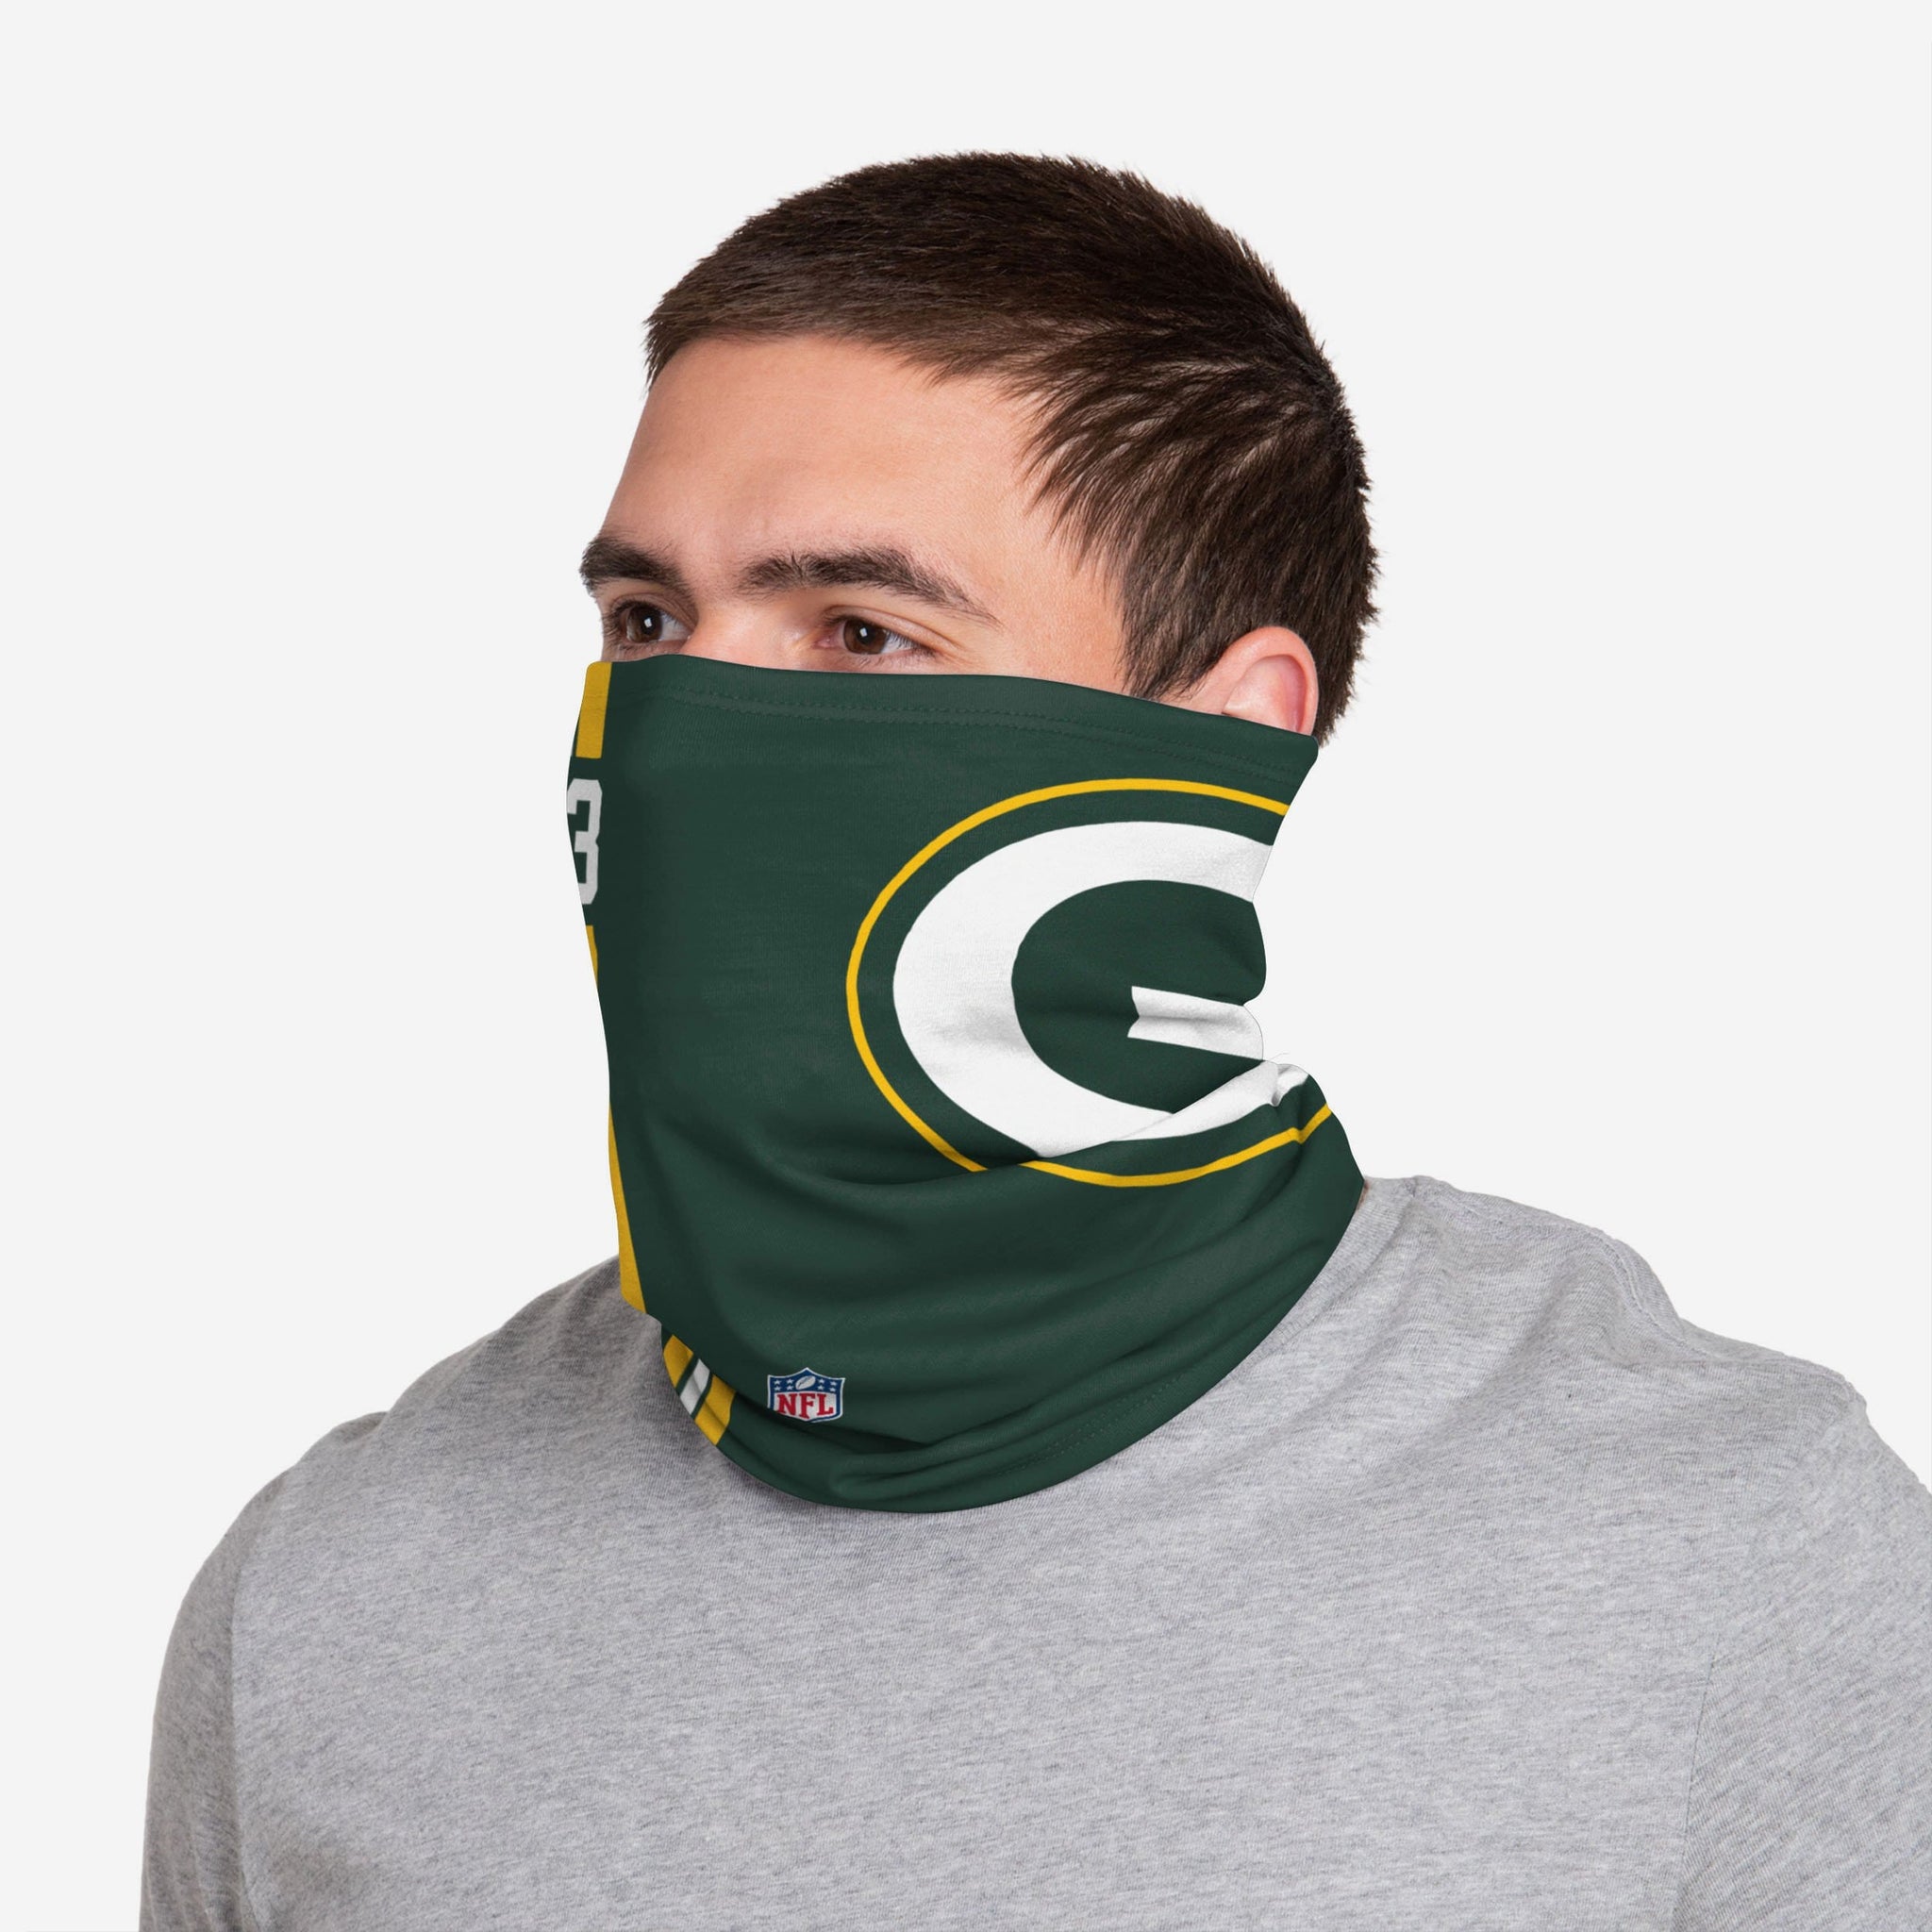 green bay packers face mask